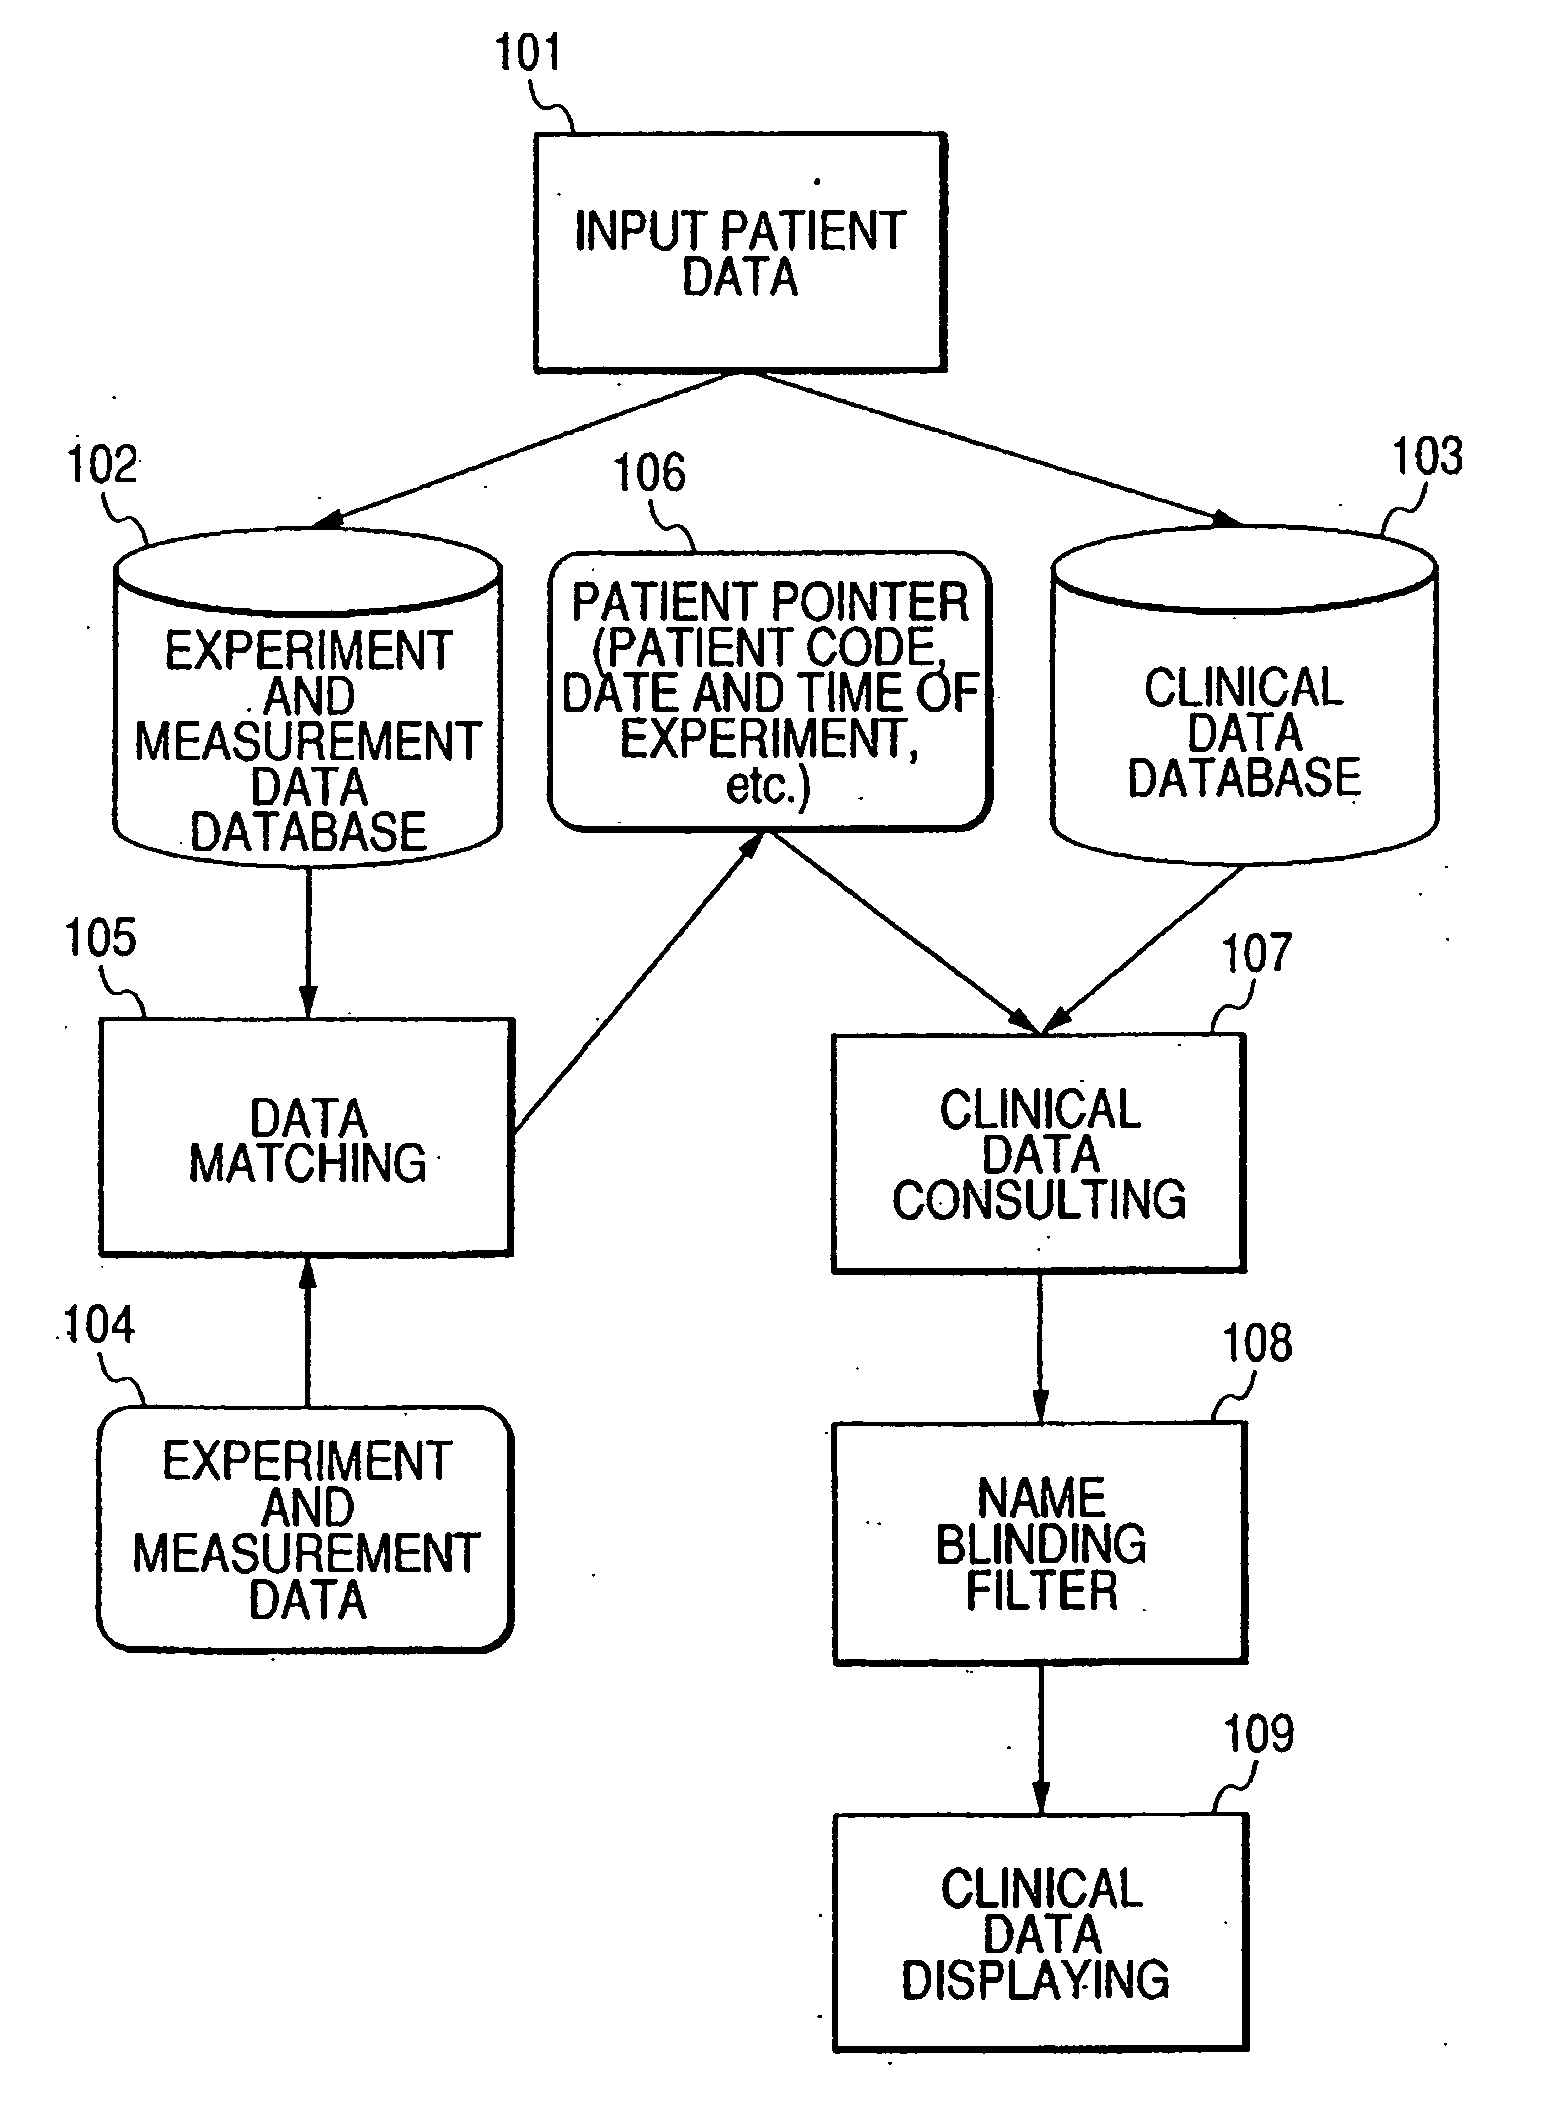 Electronic clinical chart system